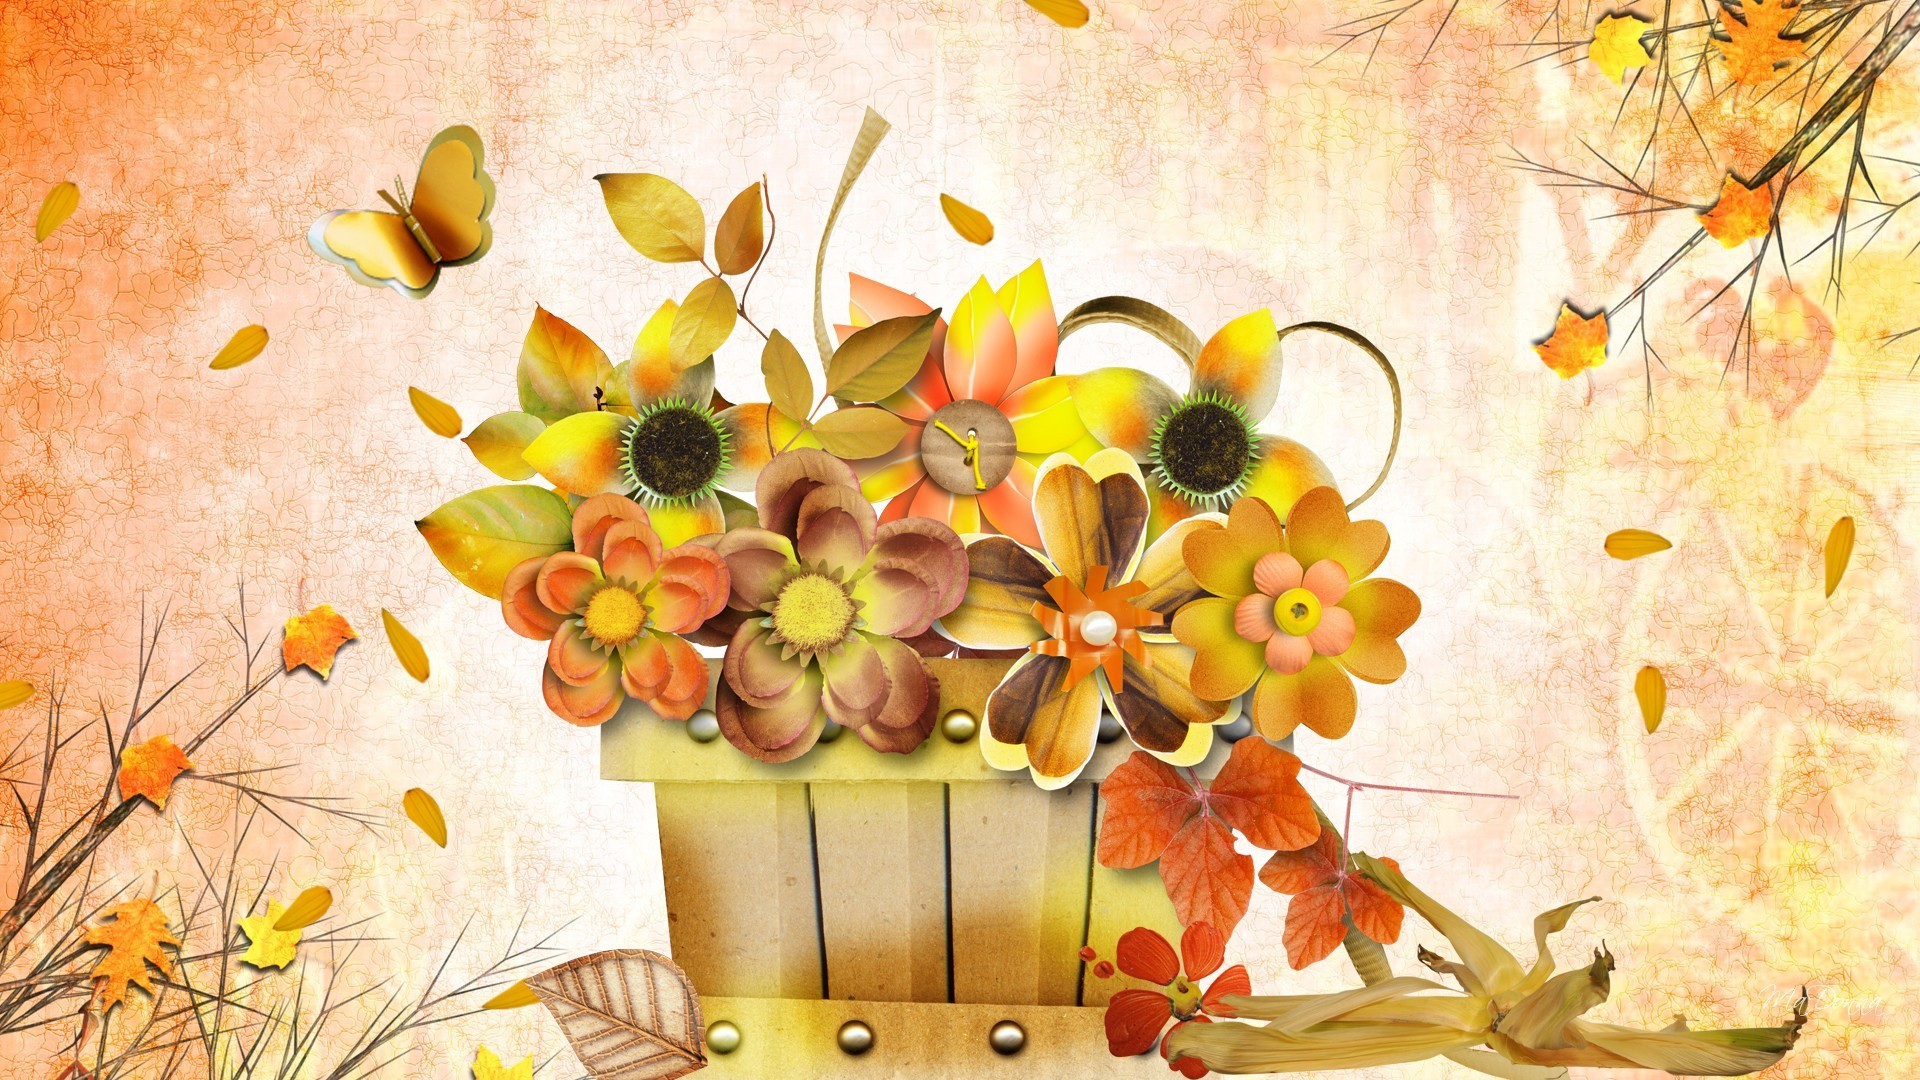 1920x1080 Firefox Tag - October Essence Autumn Flowers Butterfly Firefox Persona Corn  Orange Gold Fall Basket Leaves